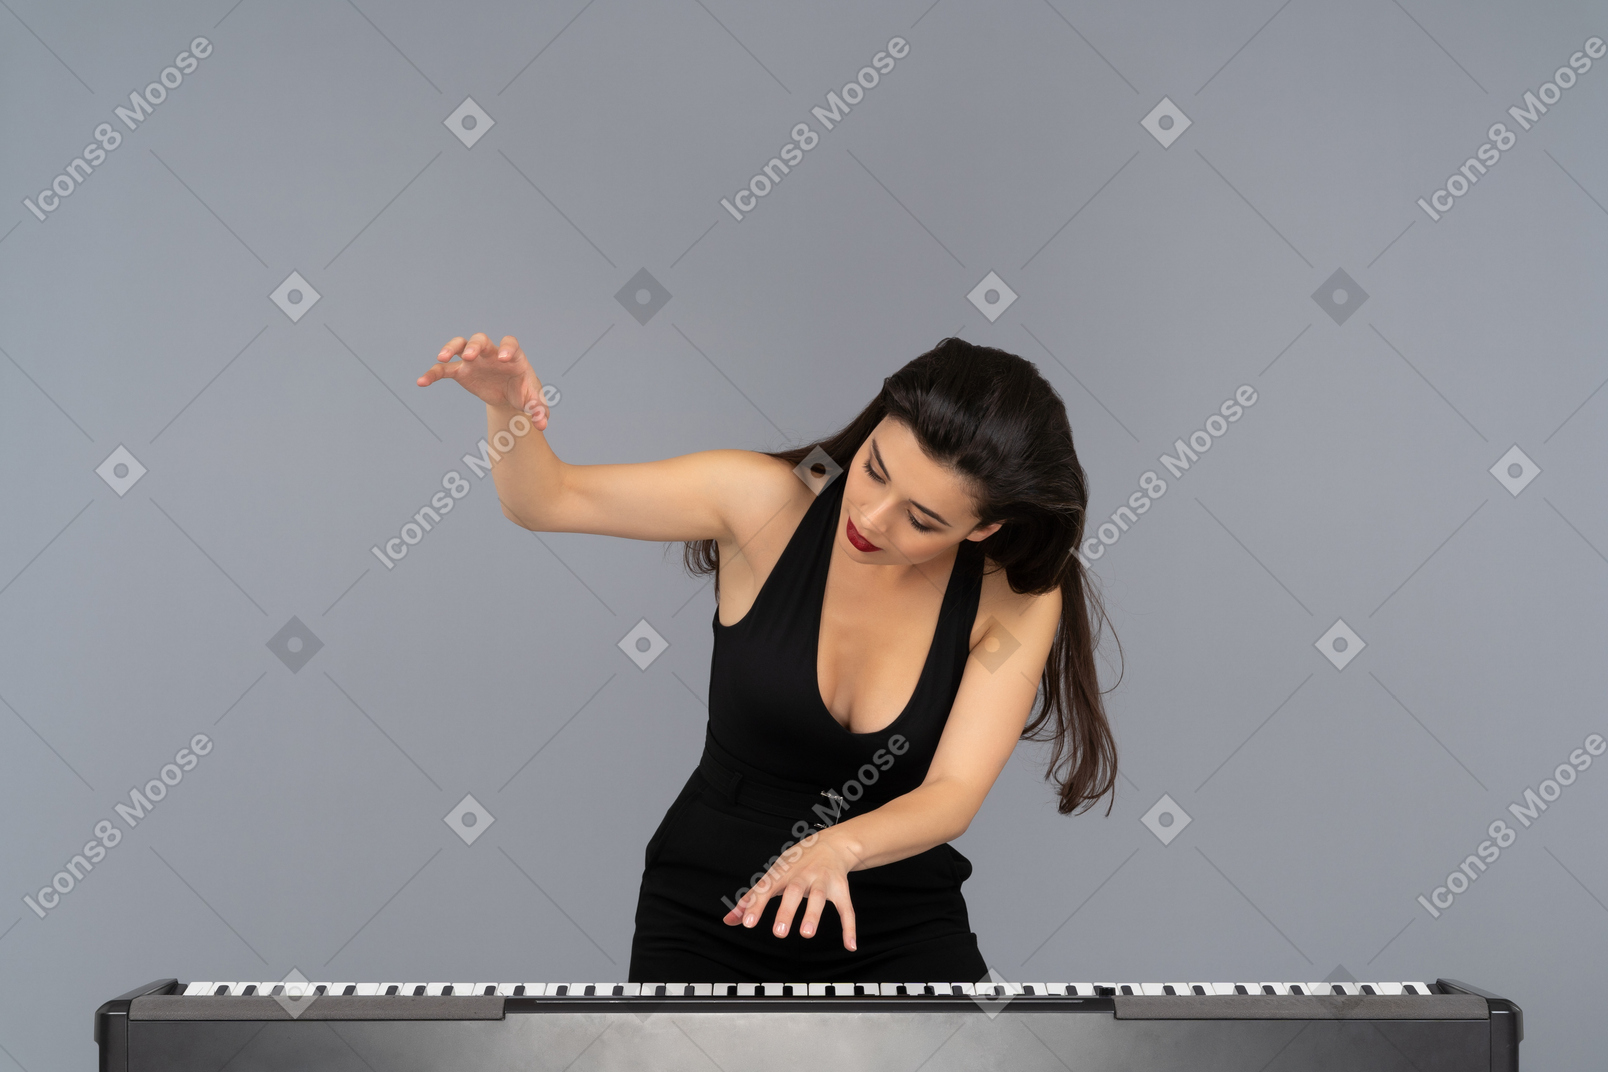 Passionate young woman striking the notes